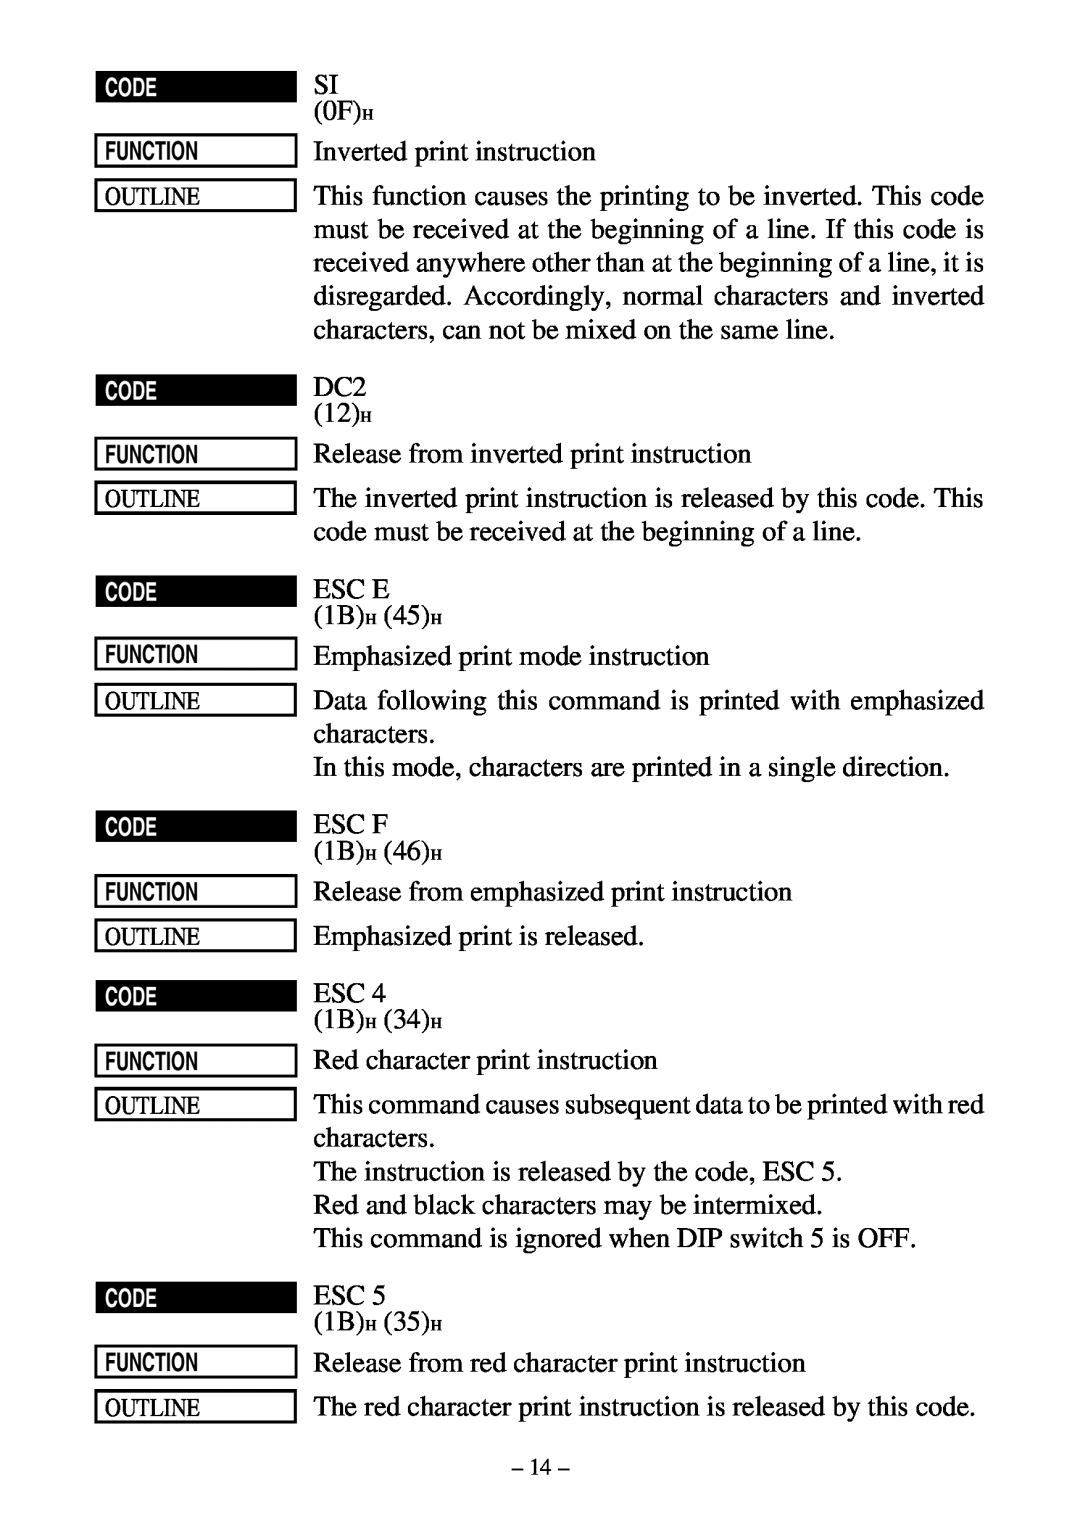 Star Micronics DP8340 user manual SI 0FH Inverted print instruction 